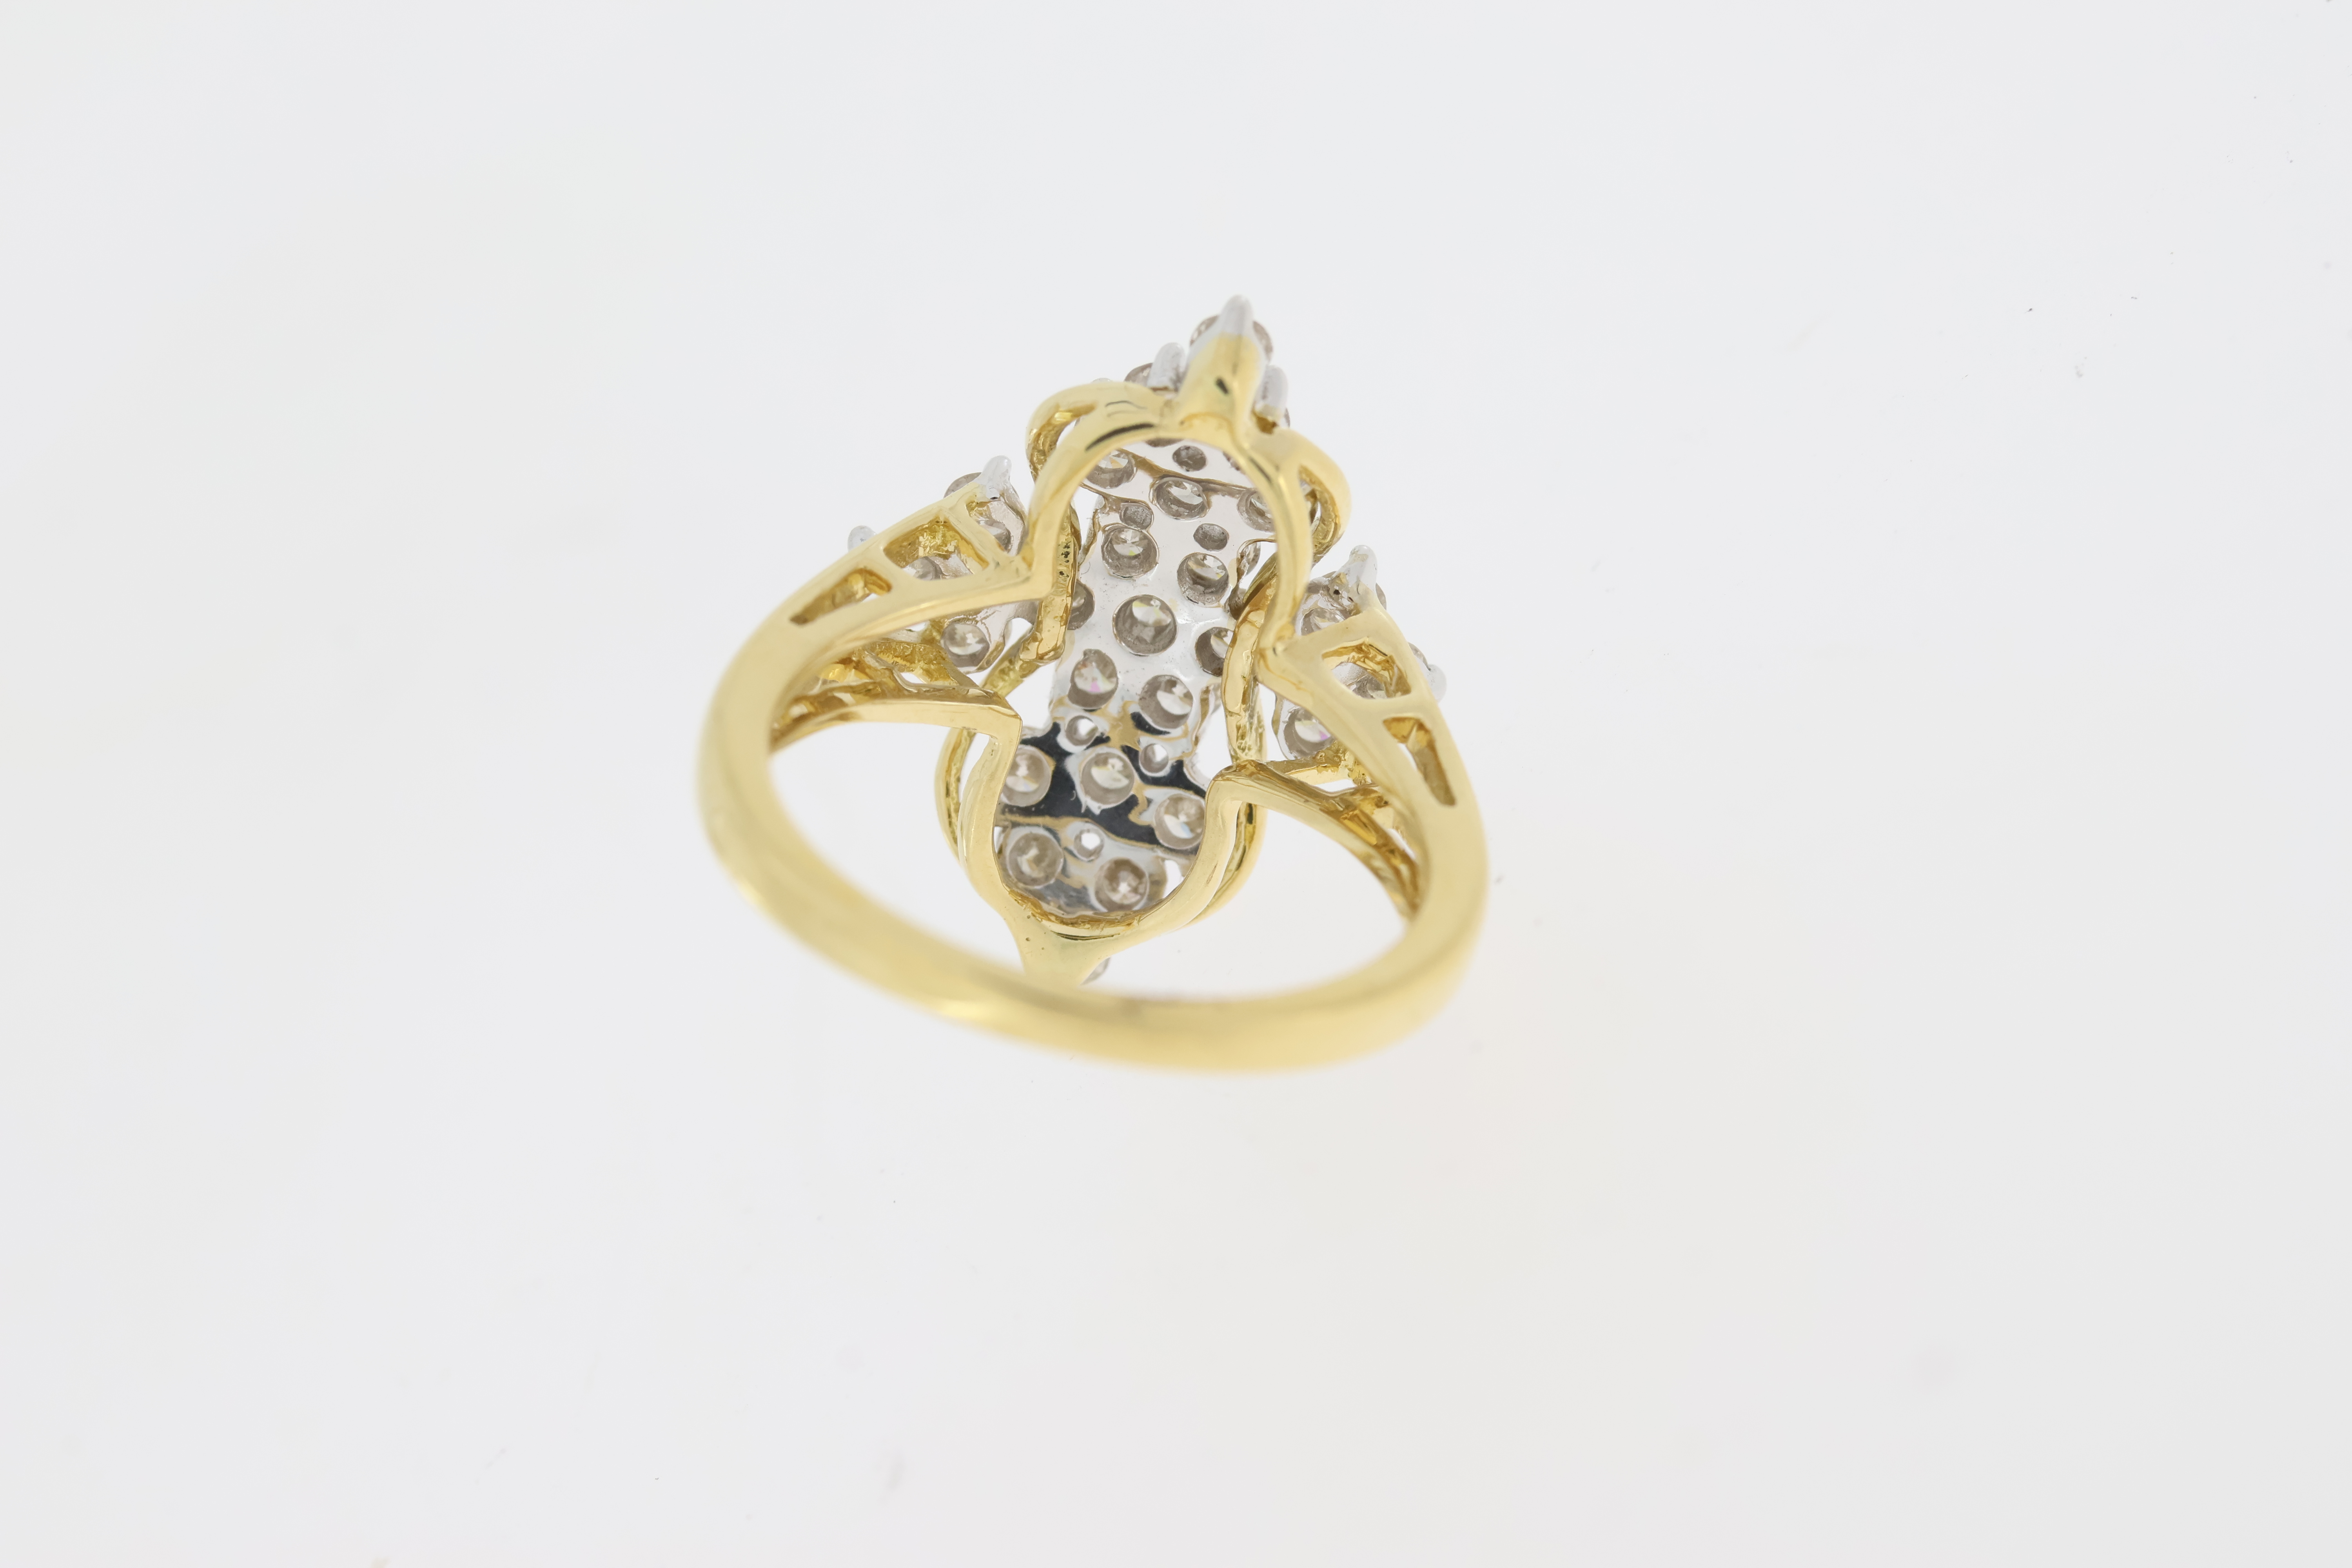 18 carat yellow gold diamond navette shaped dress ring with split shoulders. Full hall mark - Image 4 of 6